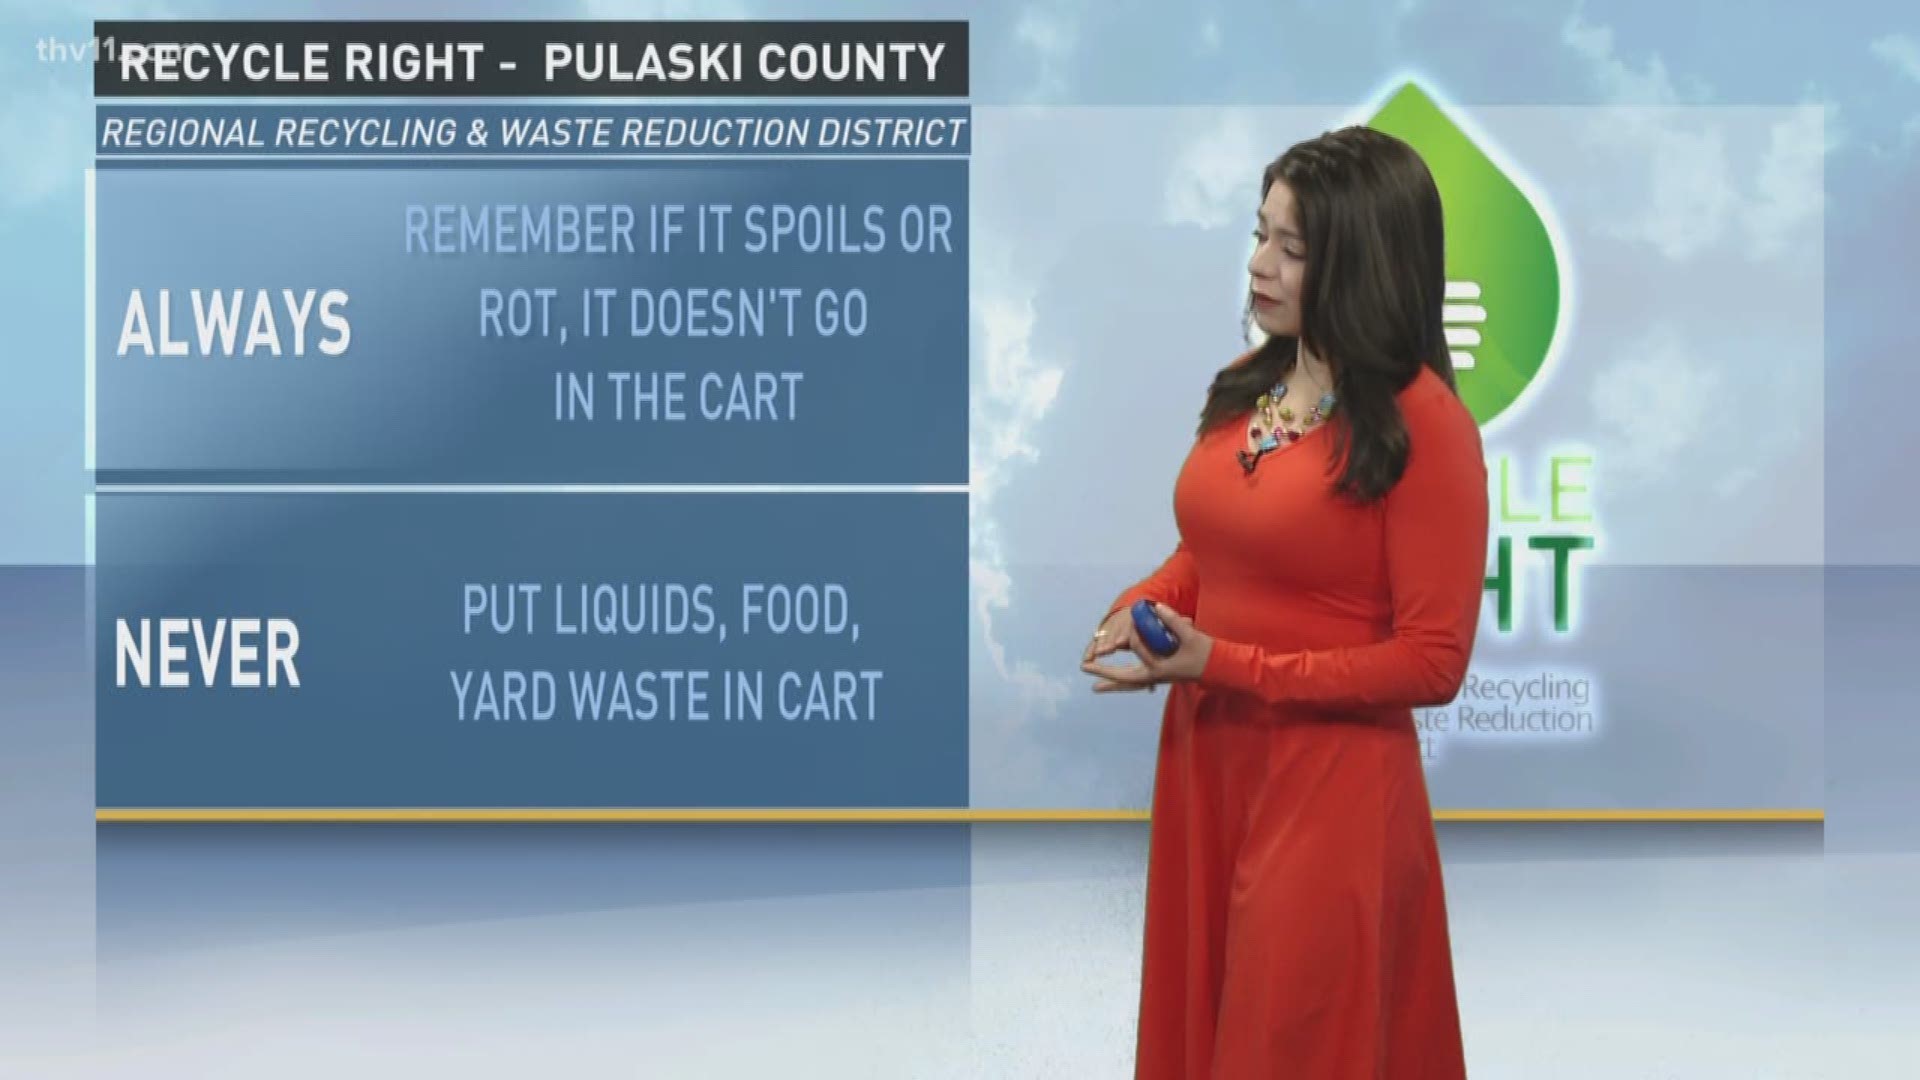 Meteorologist Mariel Ruiz has your recycle right tip for week four.